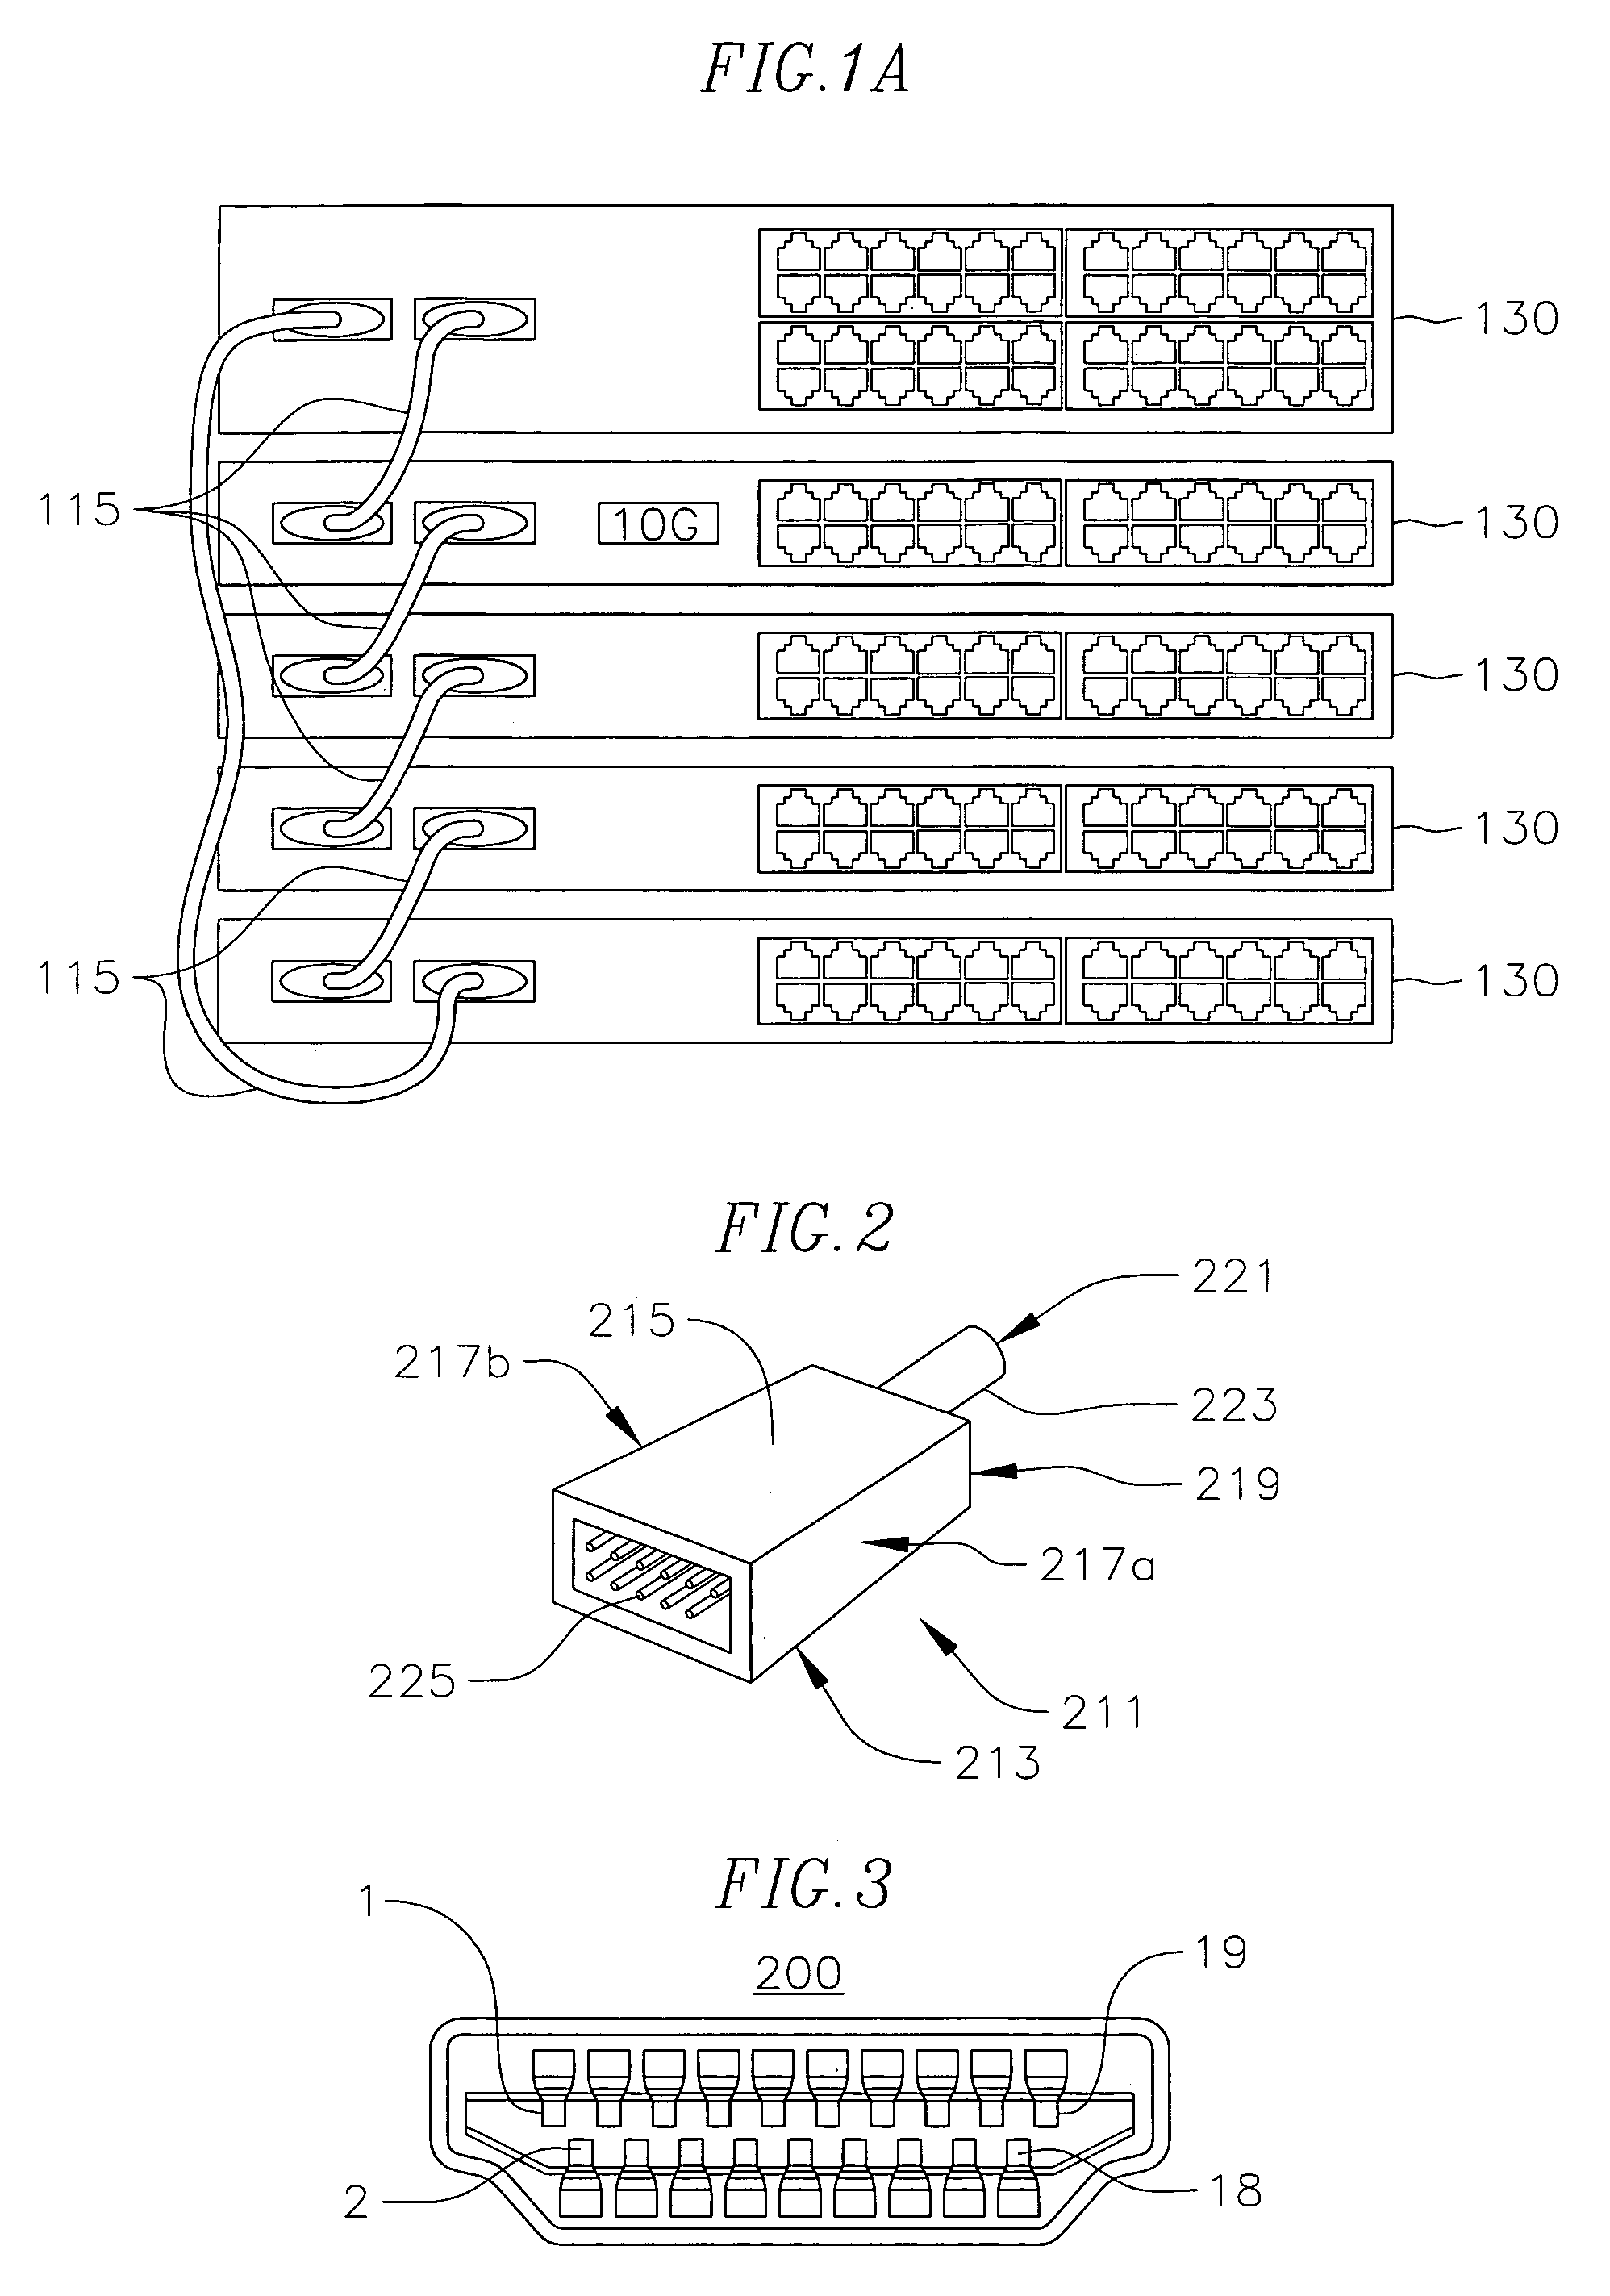 High-speed data interface for connecting network devices